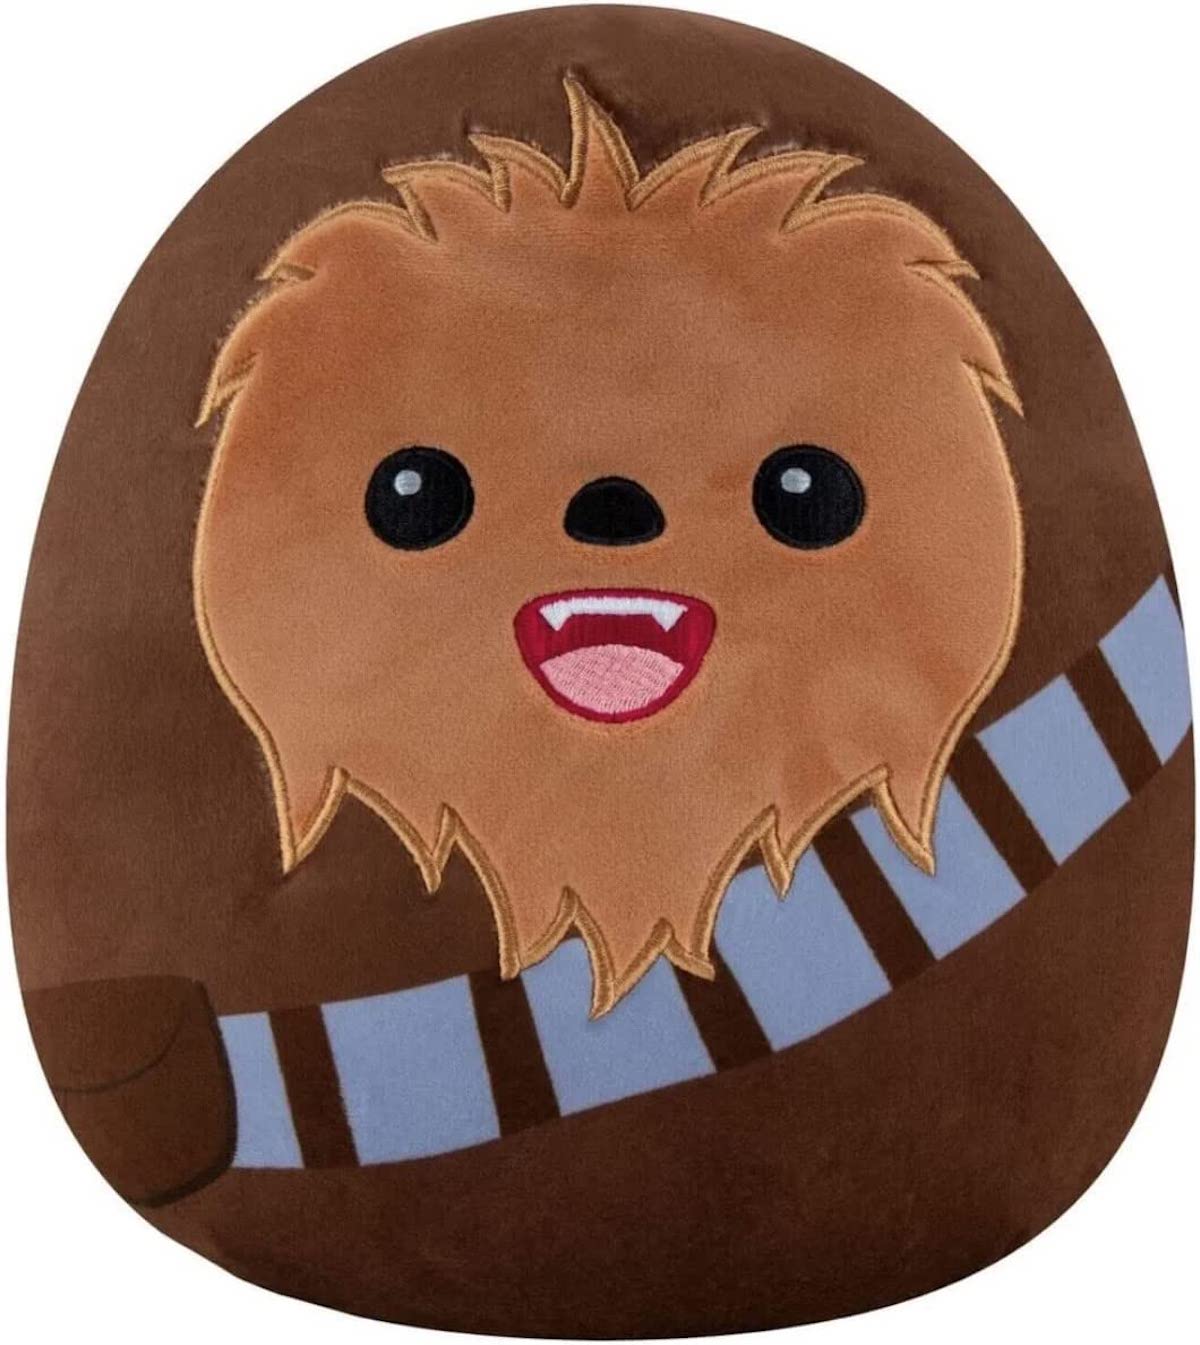 Chewbacca in Squishmallow form. Rounded and brown with a minimalist belt and open roaring mouth.